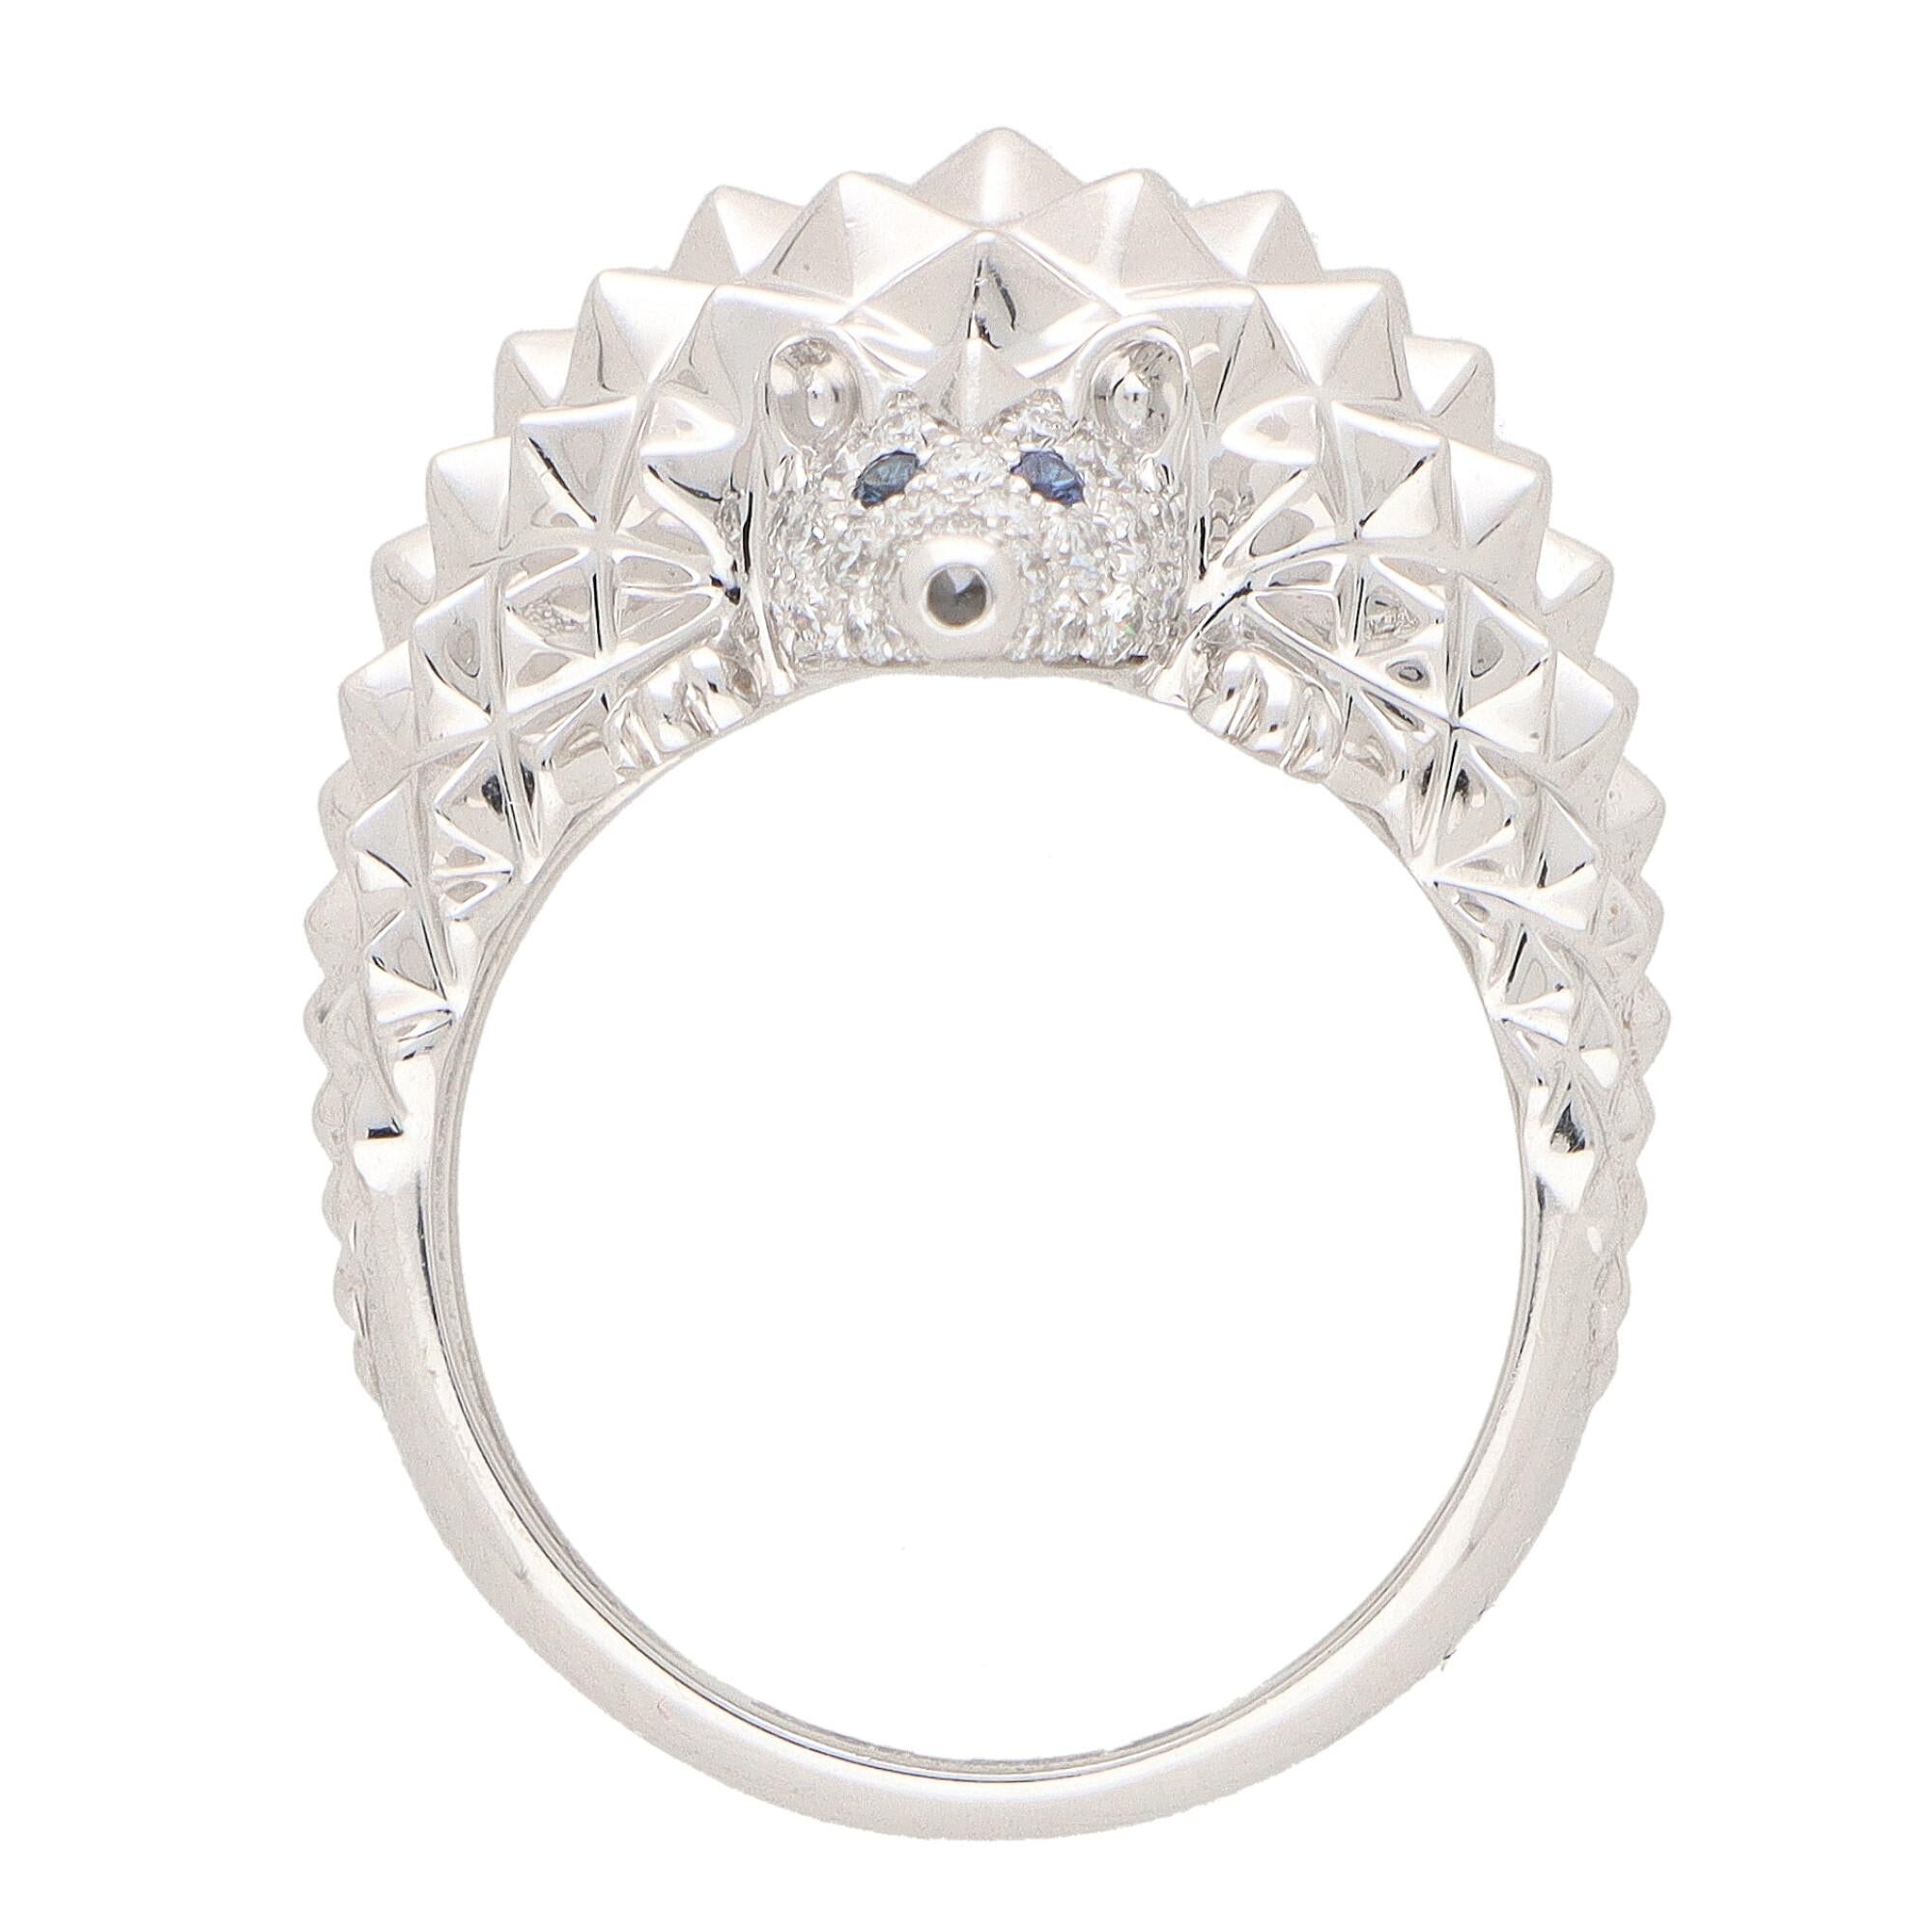 A unique vintage Boucheron diamond and sapphire ‘Hans the Hedgehog’ bombe ring set in 18k white gold.

From the current ‘Hans the Hedgehog’ collection, the ring is composed of a charming little hedgehog which sits perfectly on the finger. The